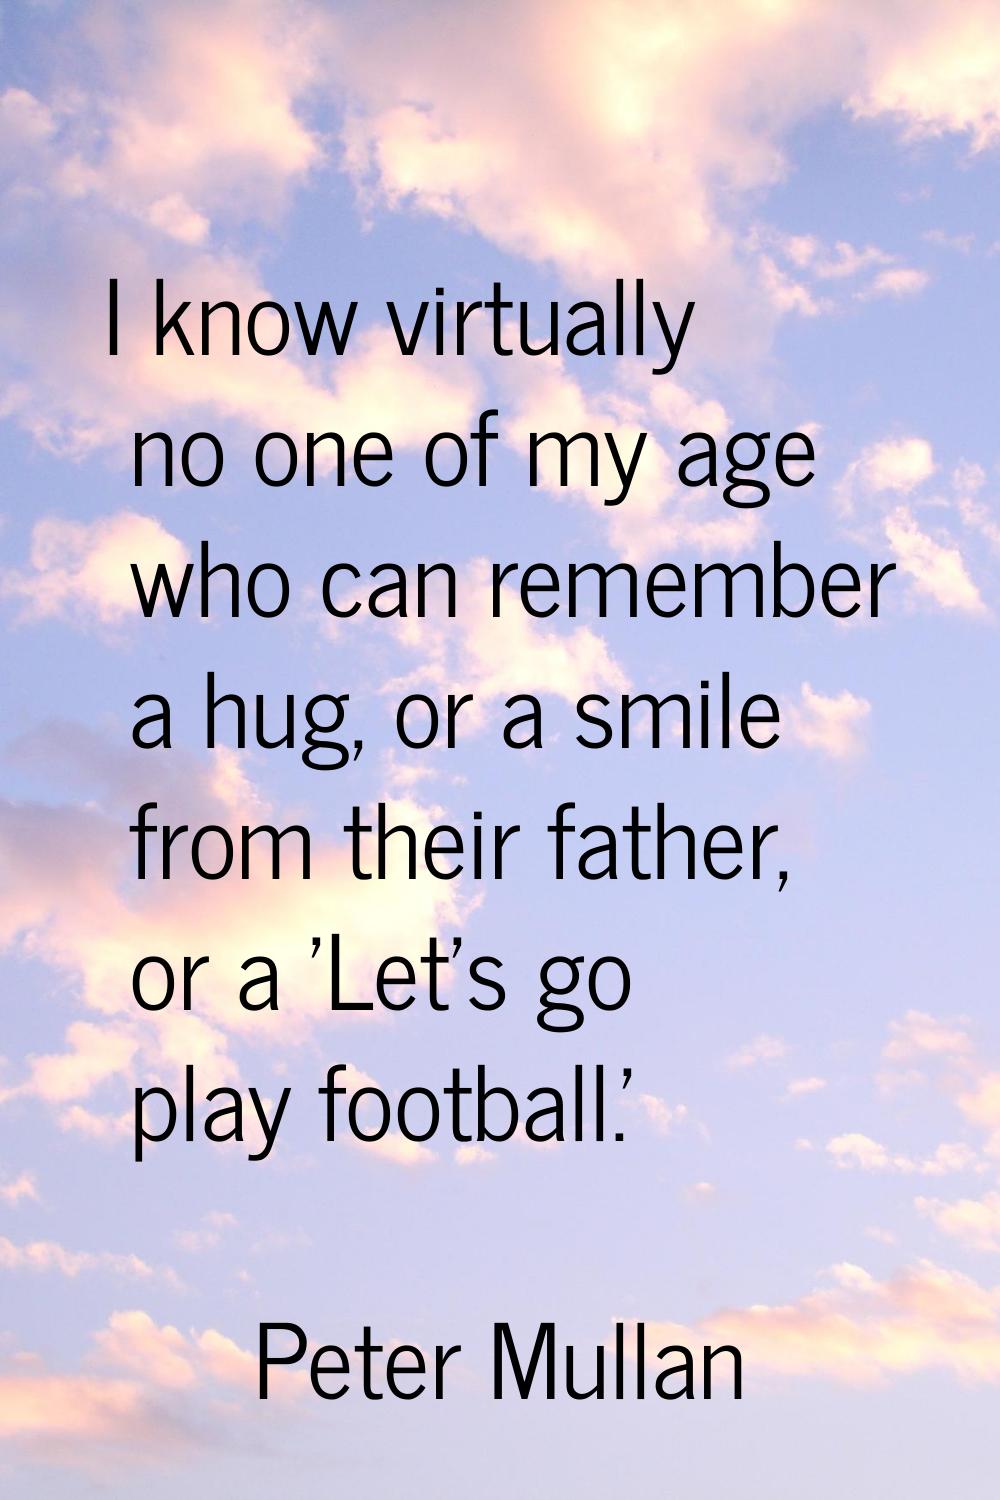 I know virtually no one of my age who can remember a hug, or a smile from their father, or a 'Let's